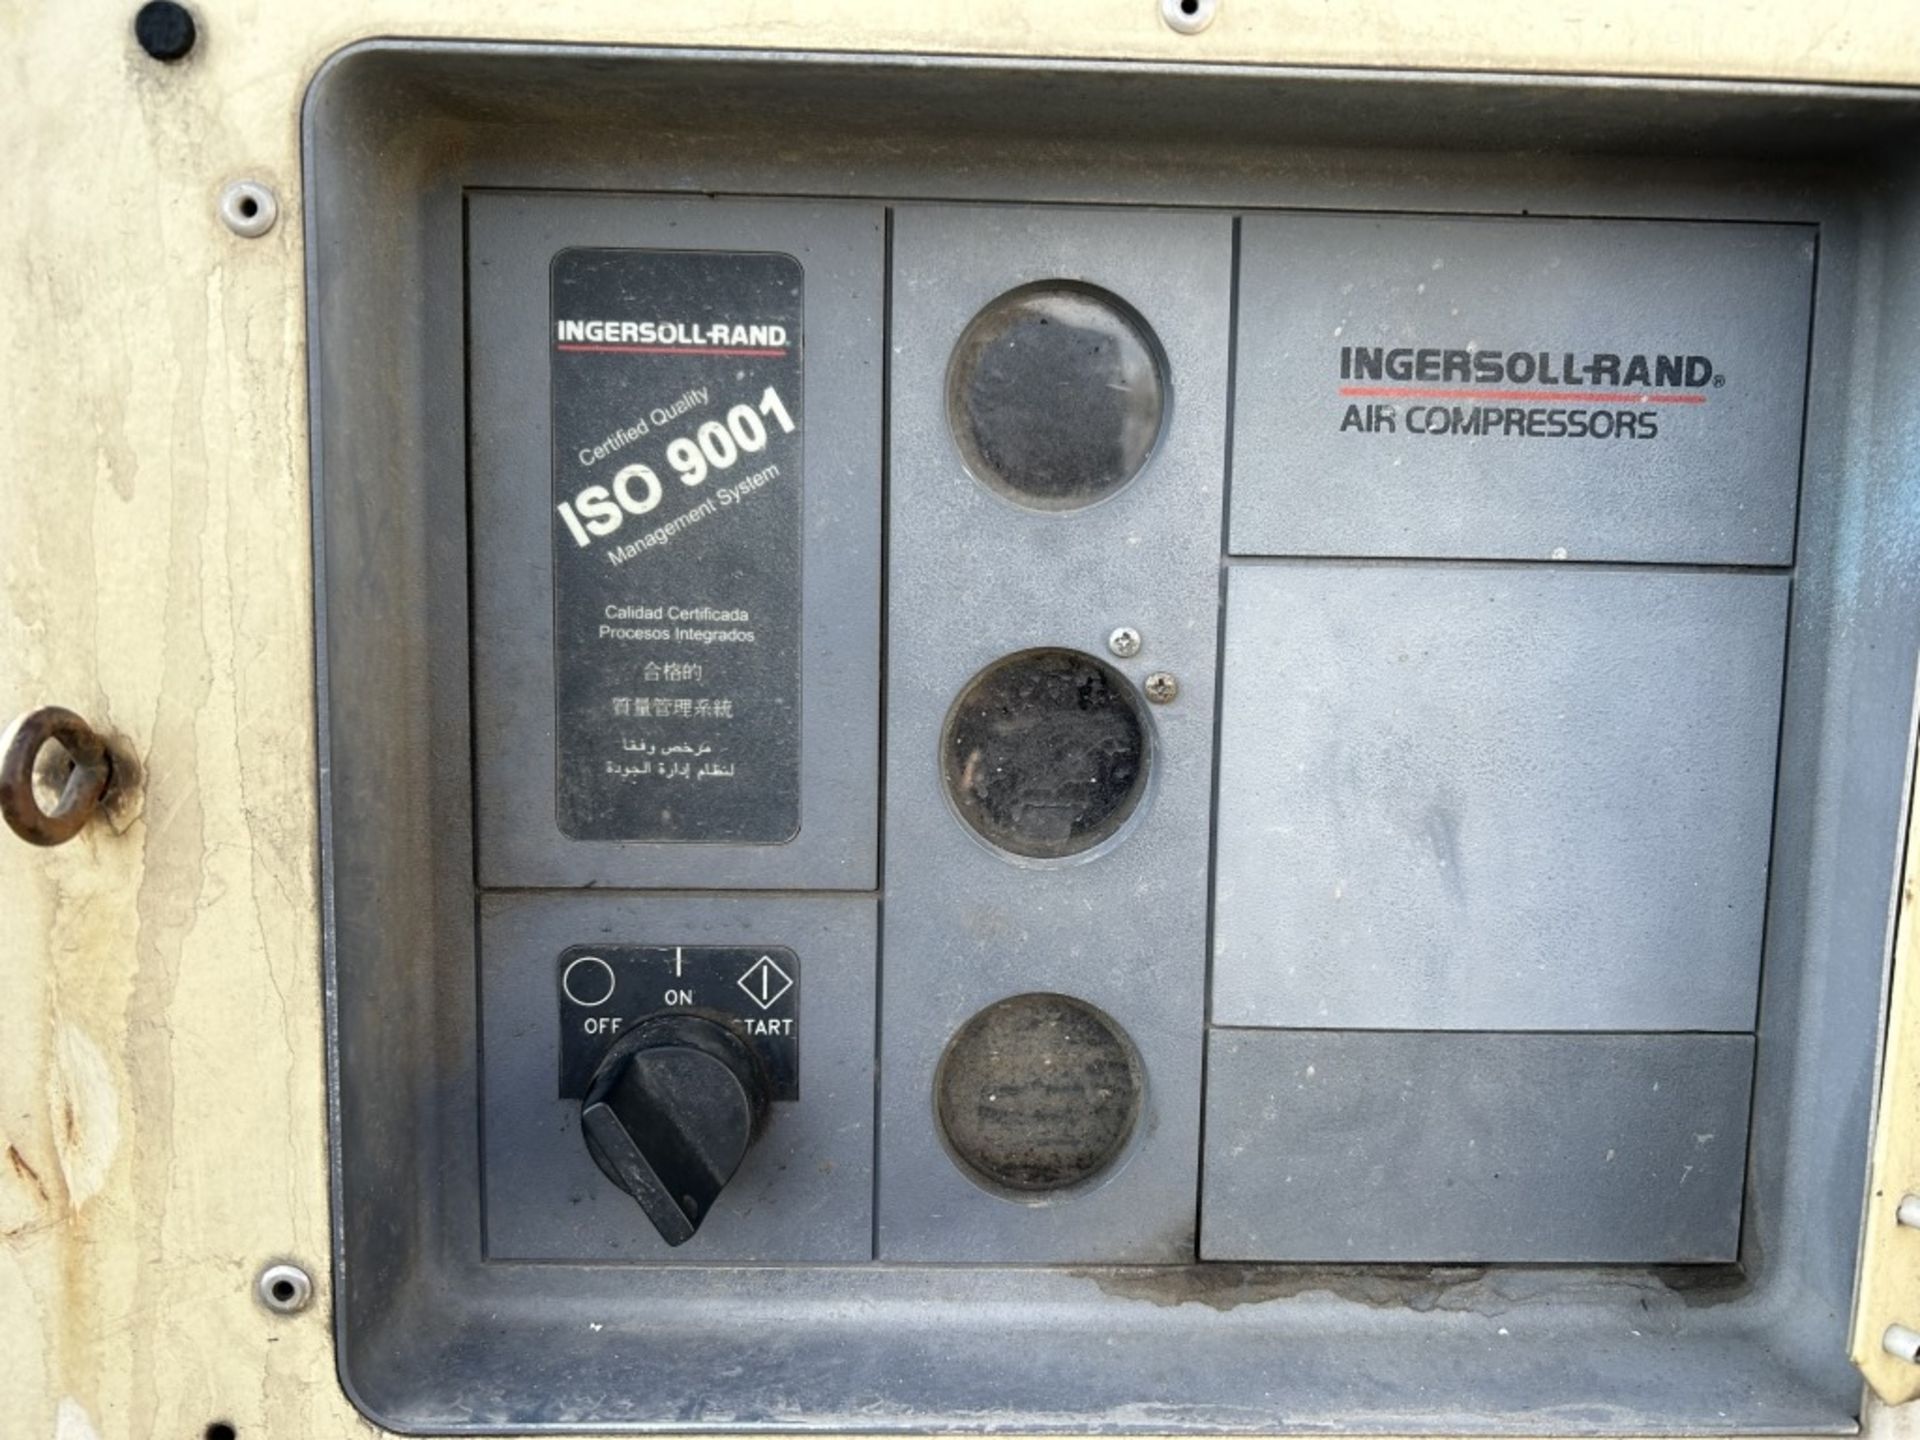 1999 Ingersoll-Rand 185 Towable Air Compressor - Image 13 of 29